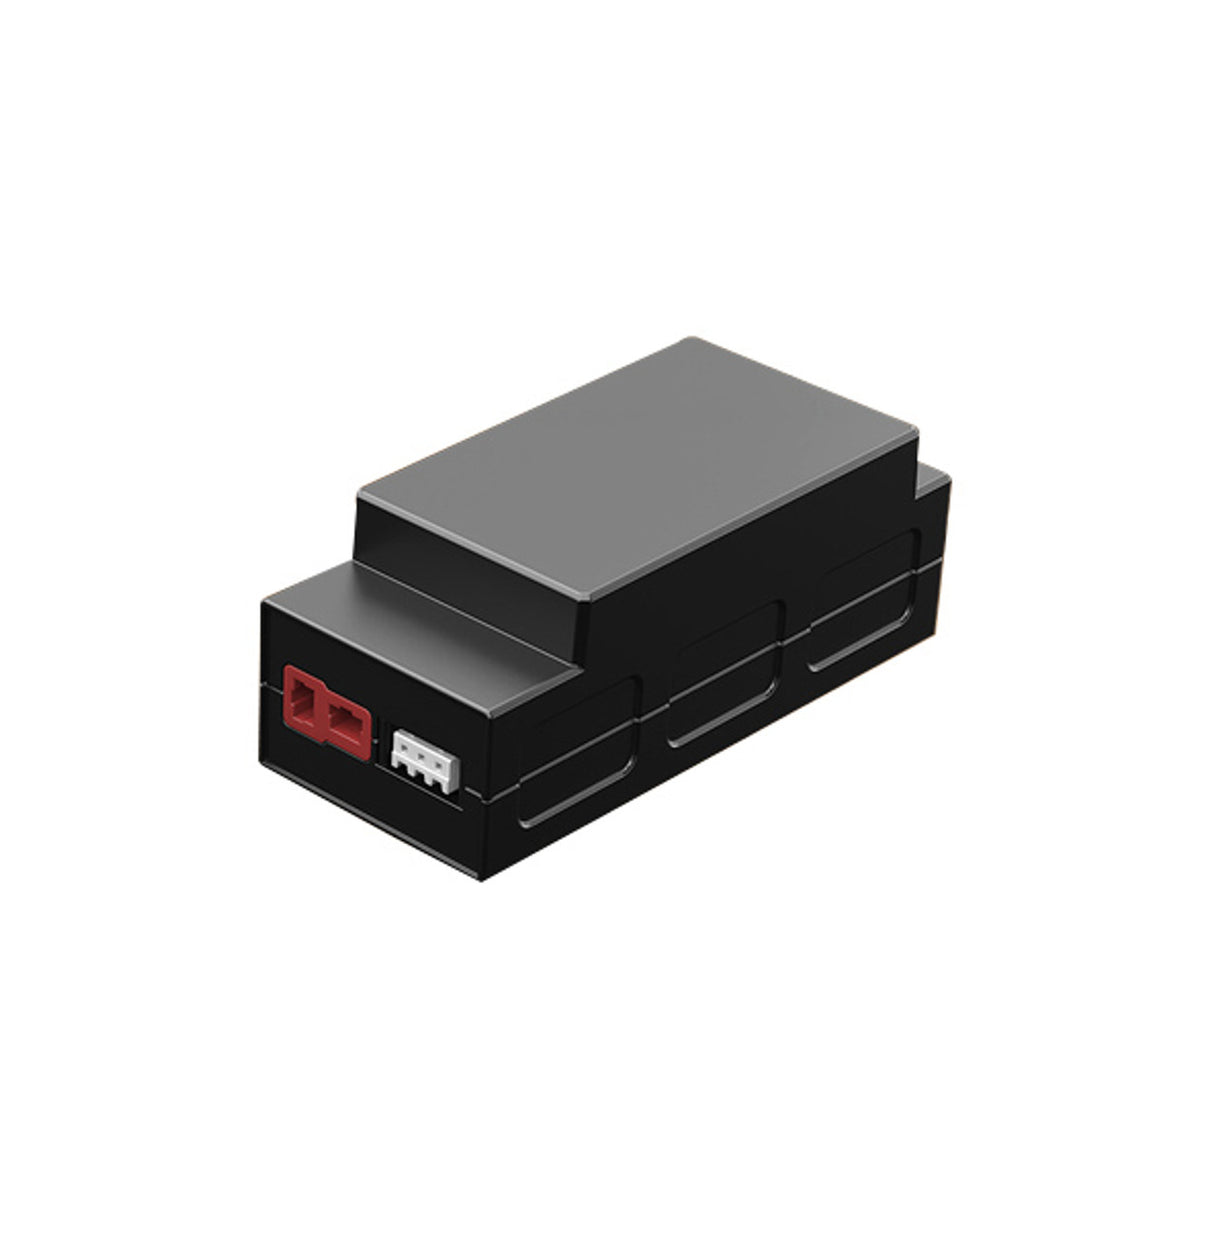 Rechargeable 7.4V 1050mAh battery pack for MJX RC cars and drones.